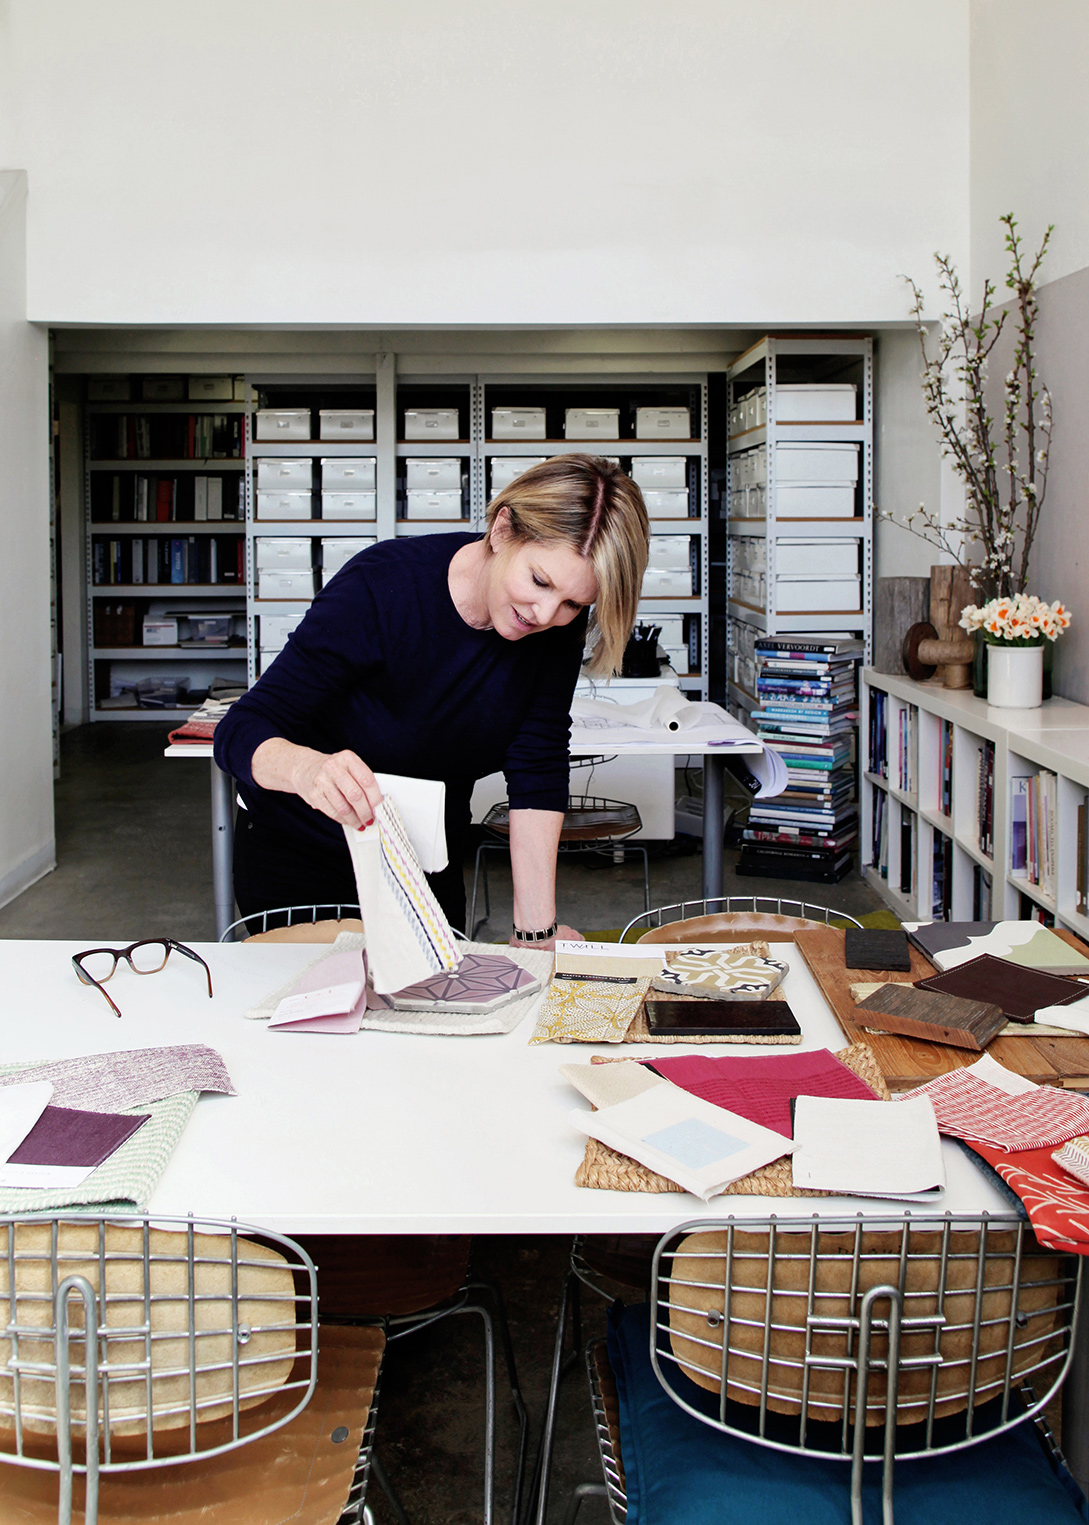 Inspiring environmental portrait by Kimberly Genevieve: Interior designer immersed in swatch selection process